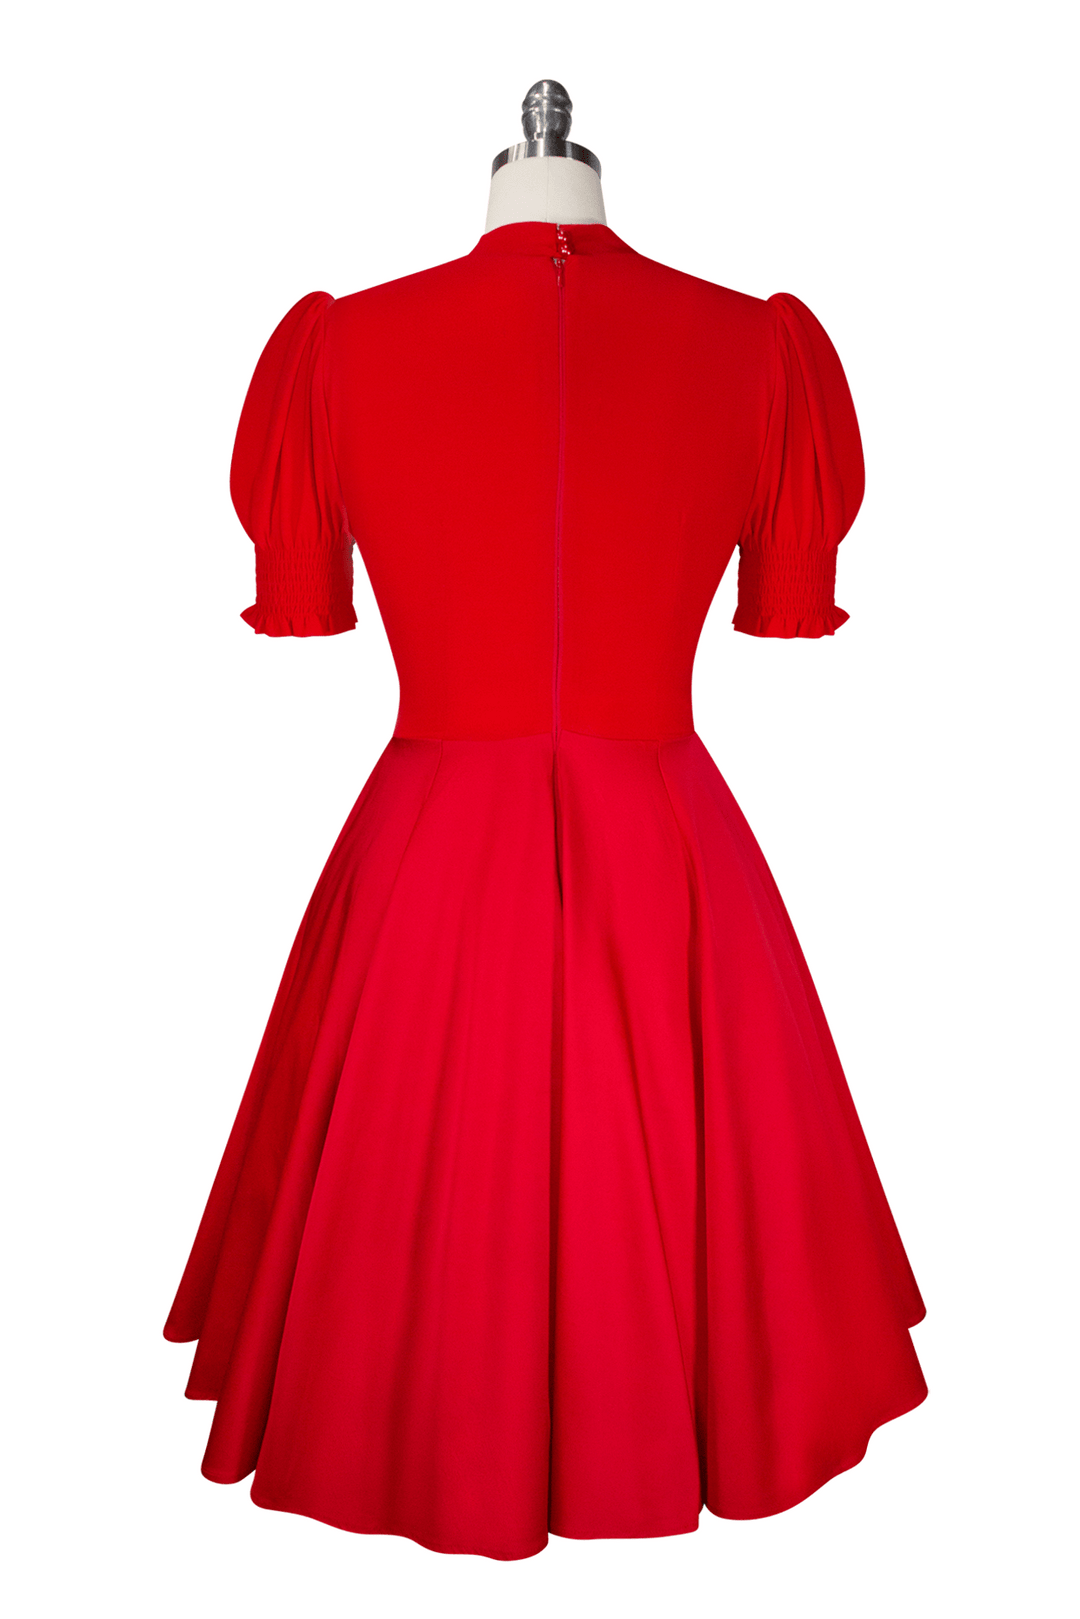 Miss Strawberry Pageant Dress - Kitten D'Amour